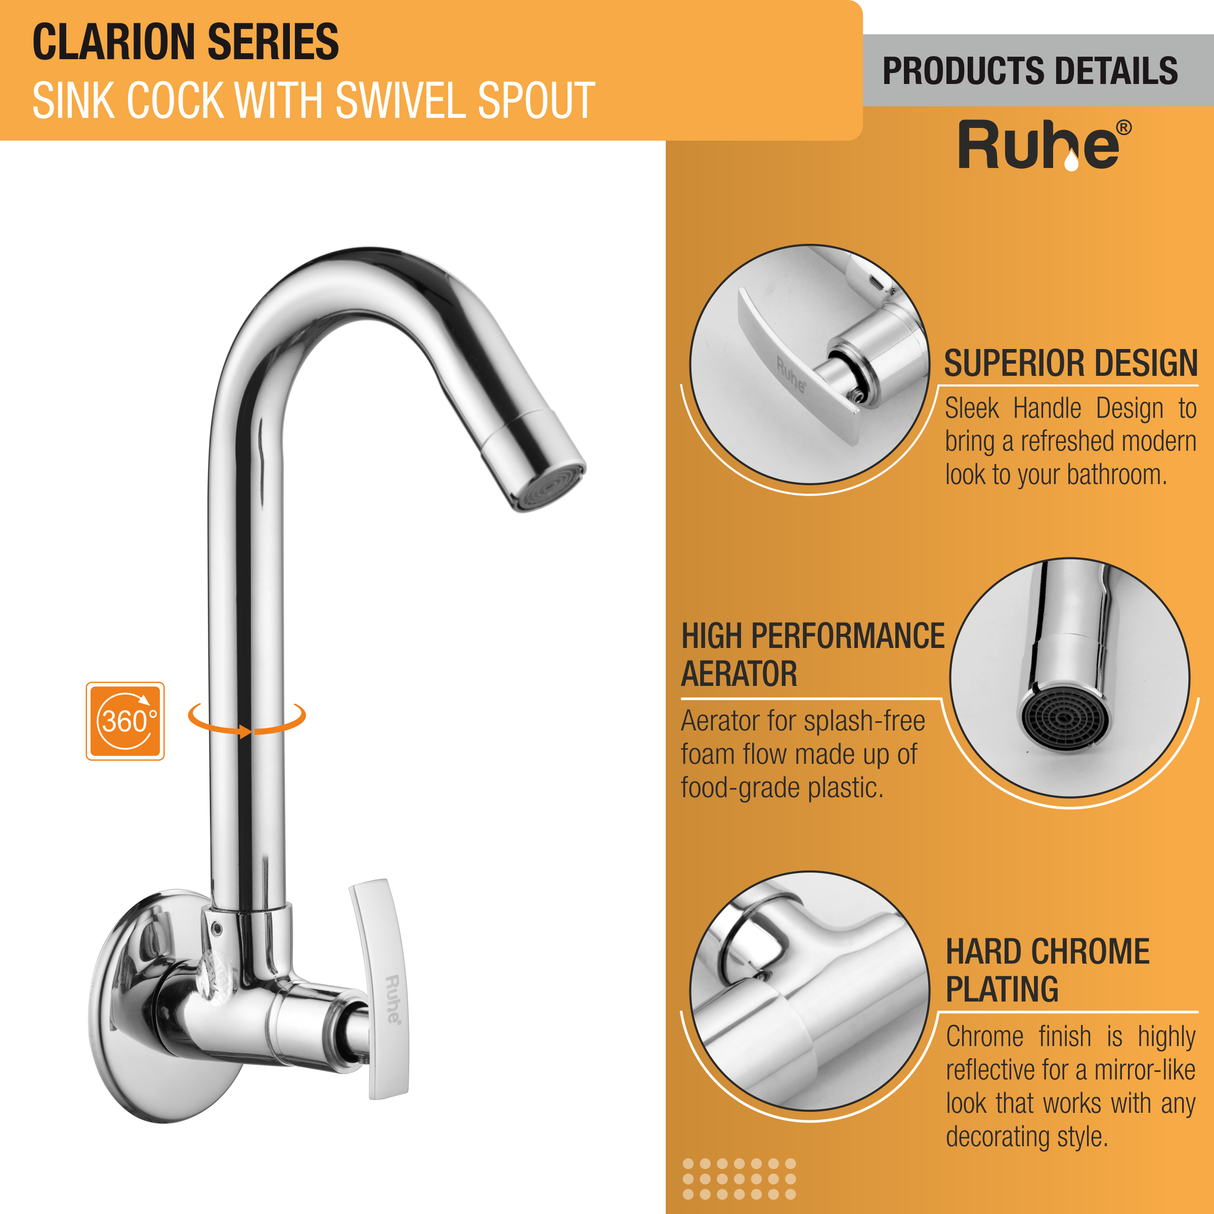 Clarion Sink Tap with Small (12 inches) Round Swivel Spout Faucet product details